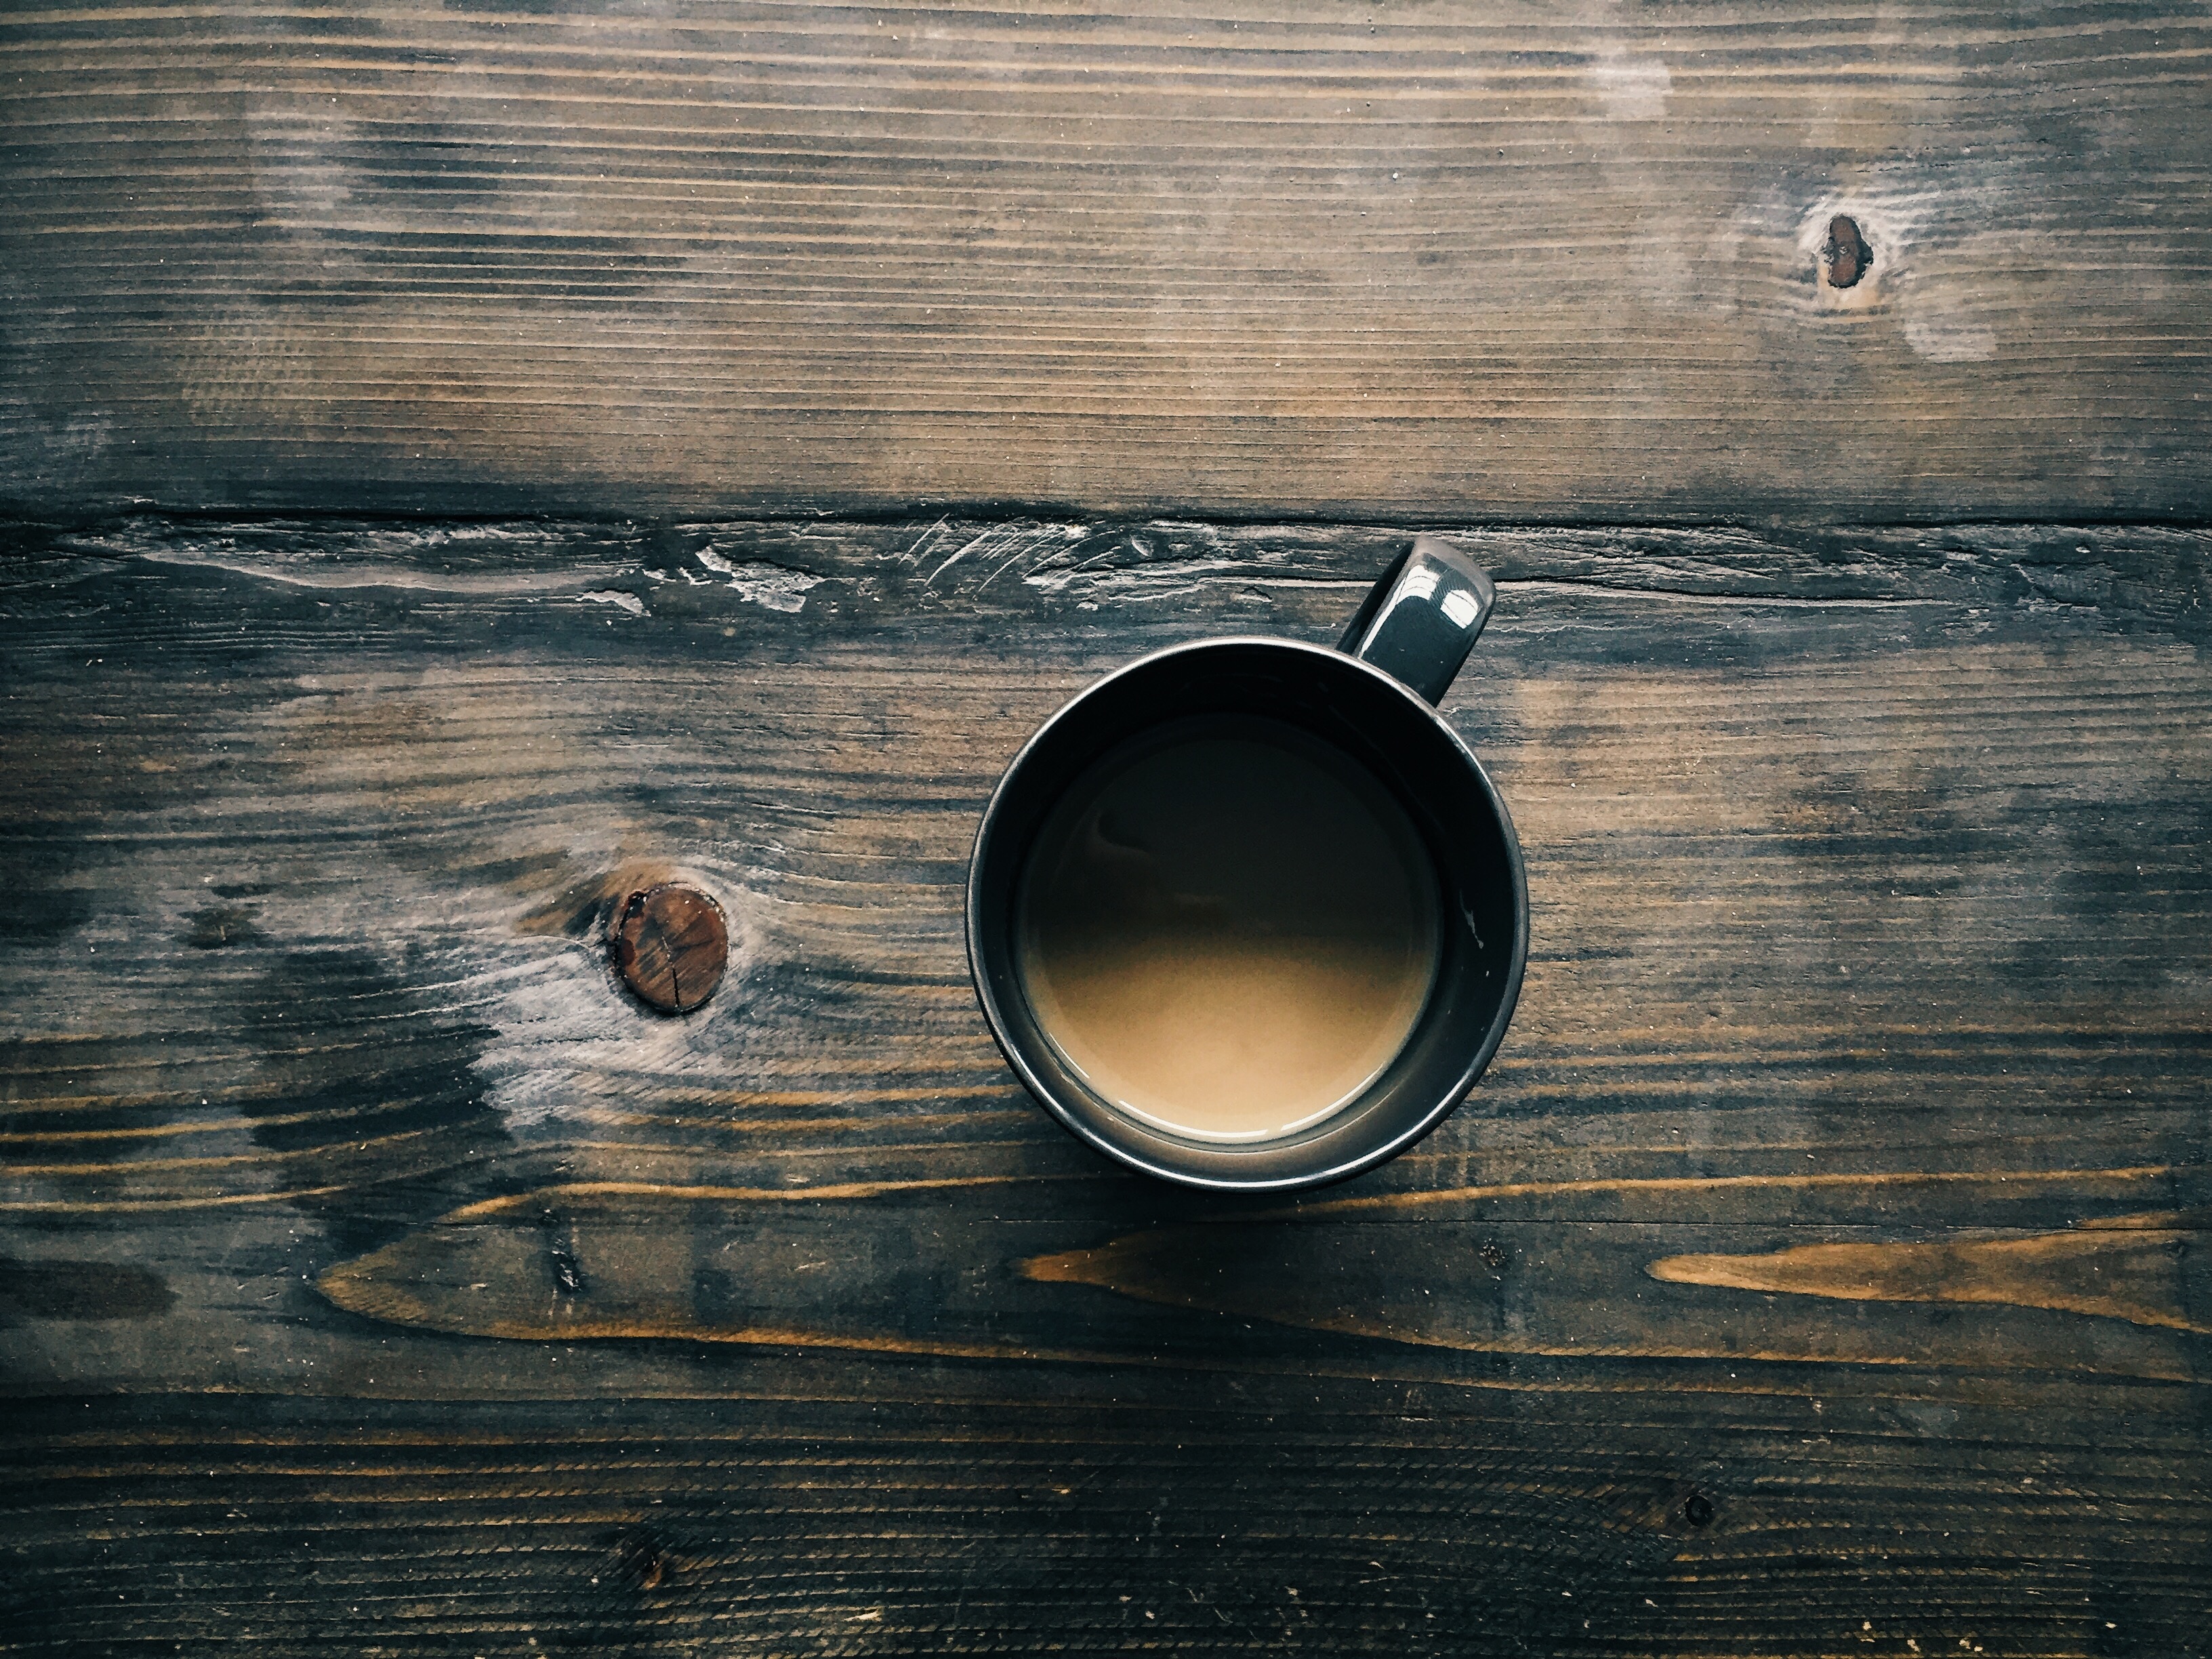 android minimalism, cup, coffee, wood surface, wooden surface